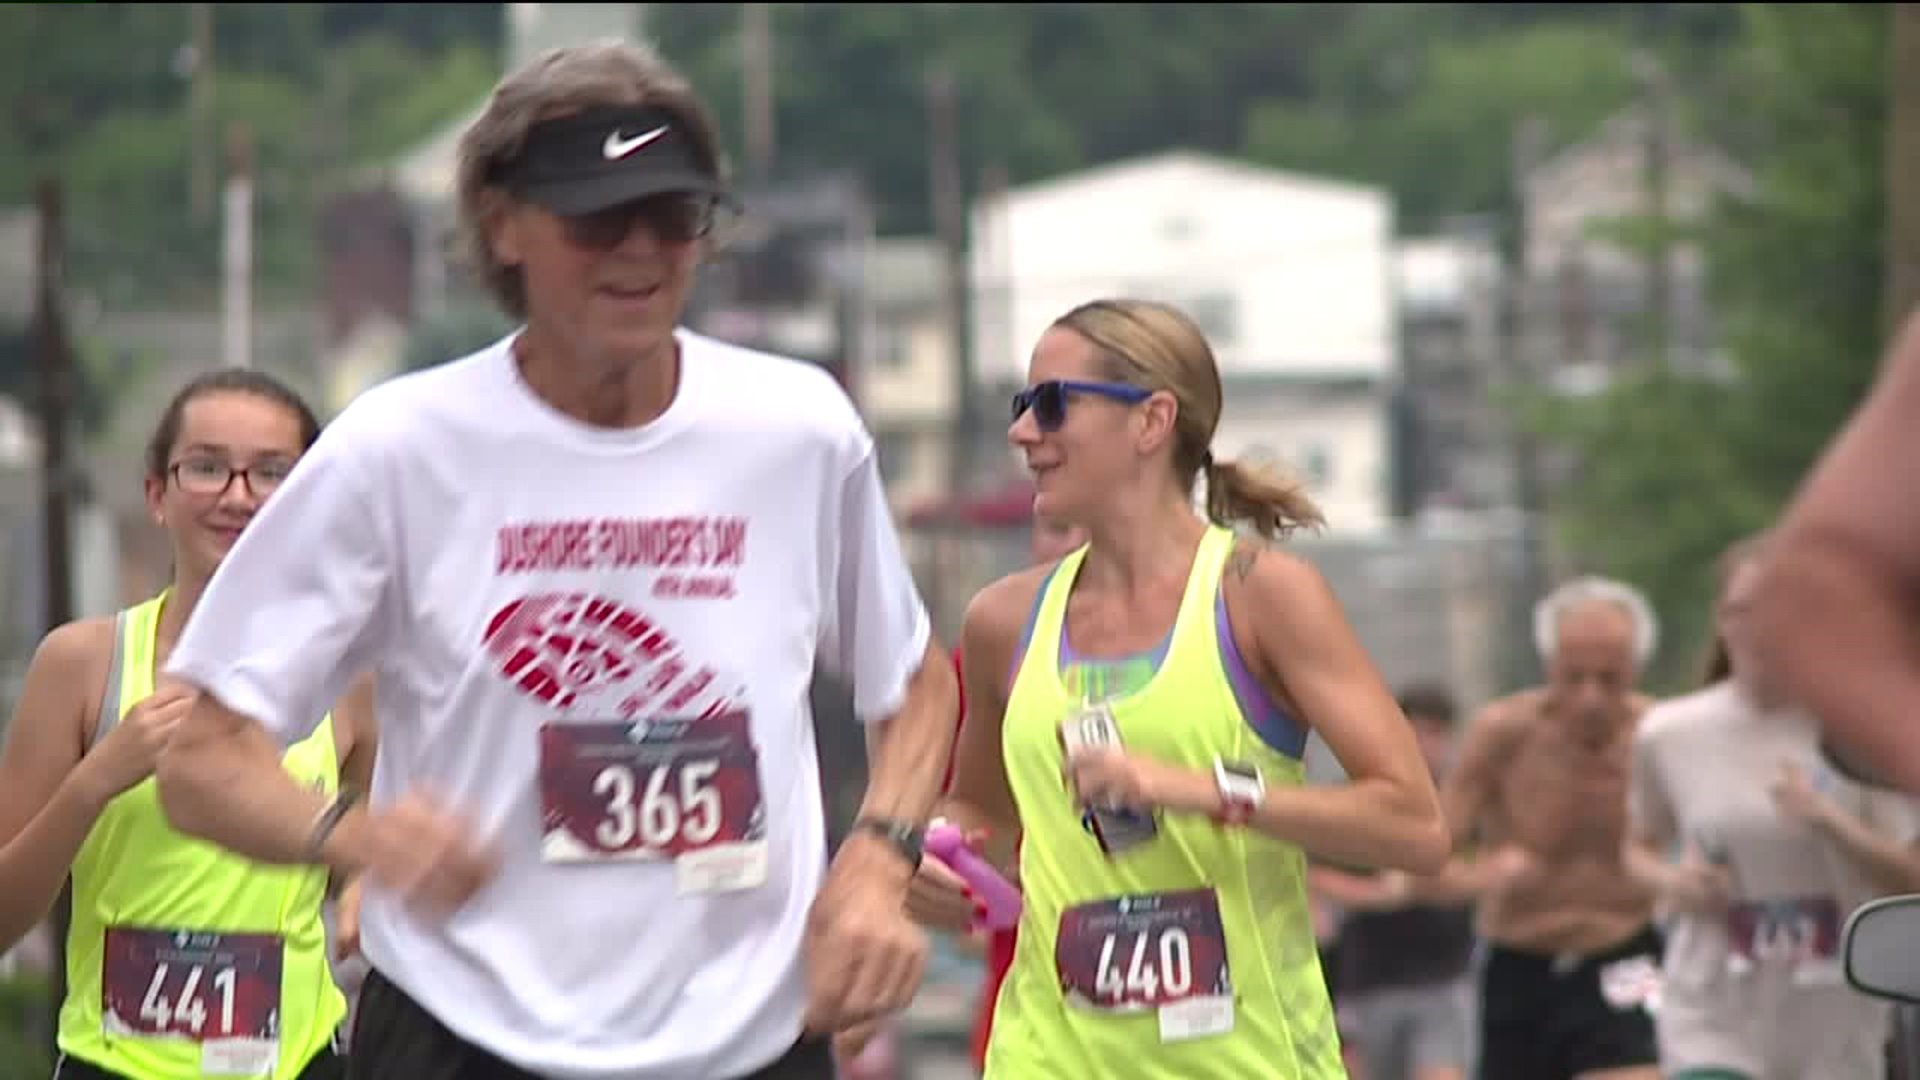 7th Annual Wyoming Valley Striders Race Held in Swoyersville